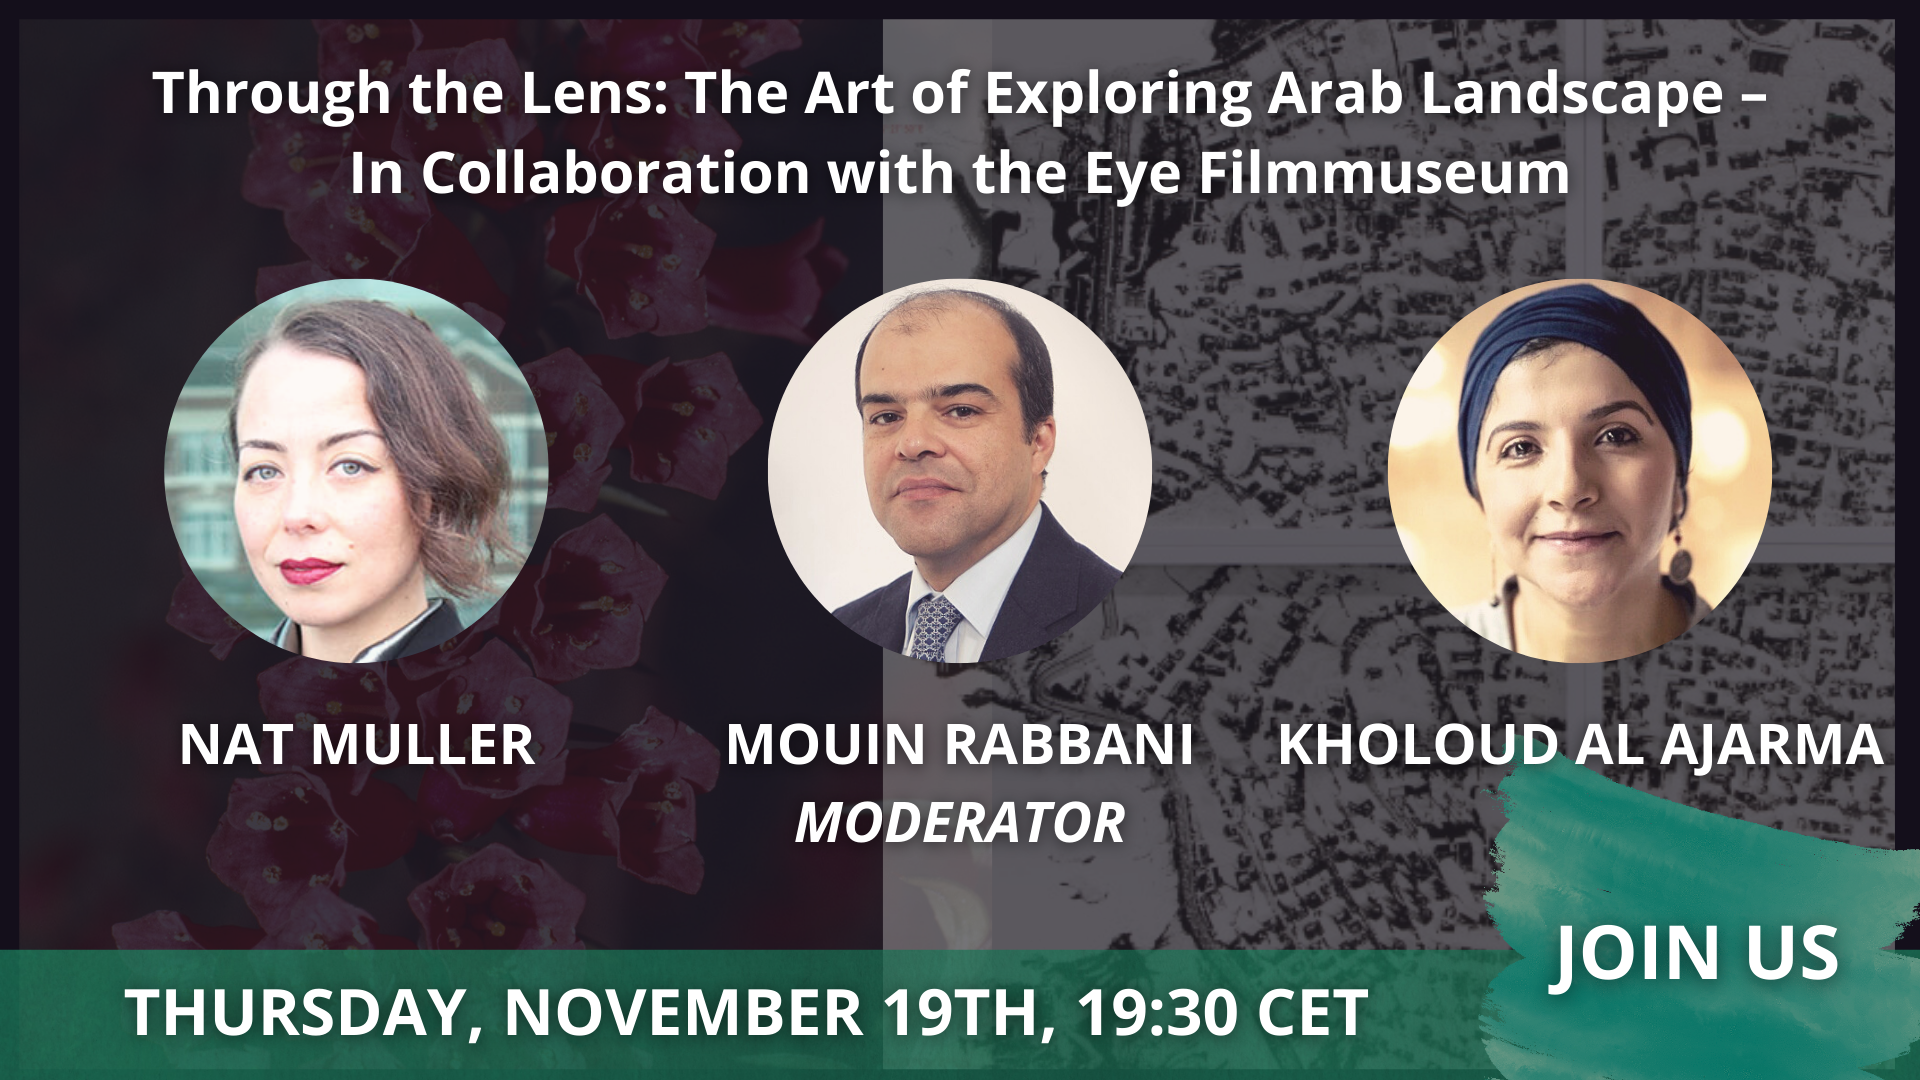 Rabbani Talks ? November 19th in collaboration with the Eye Filmmuseum